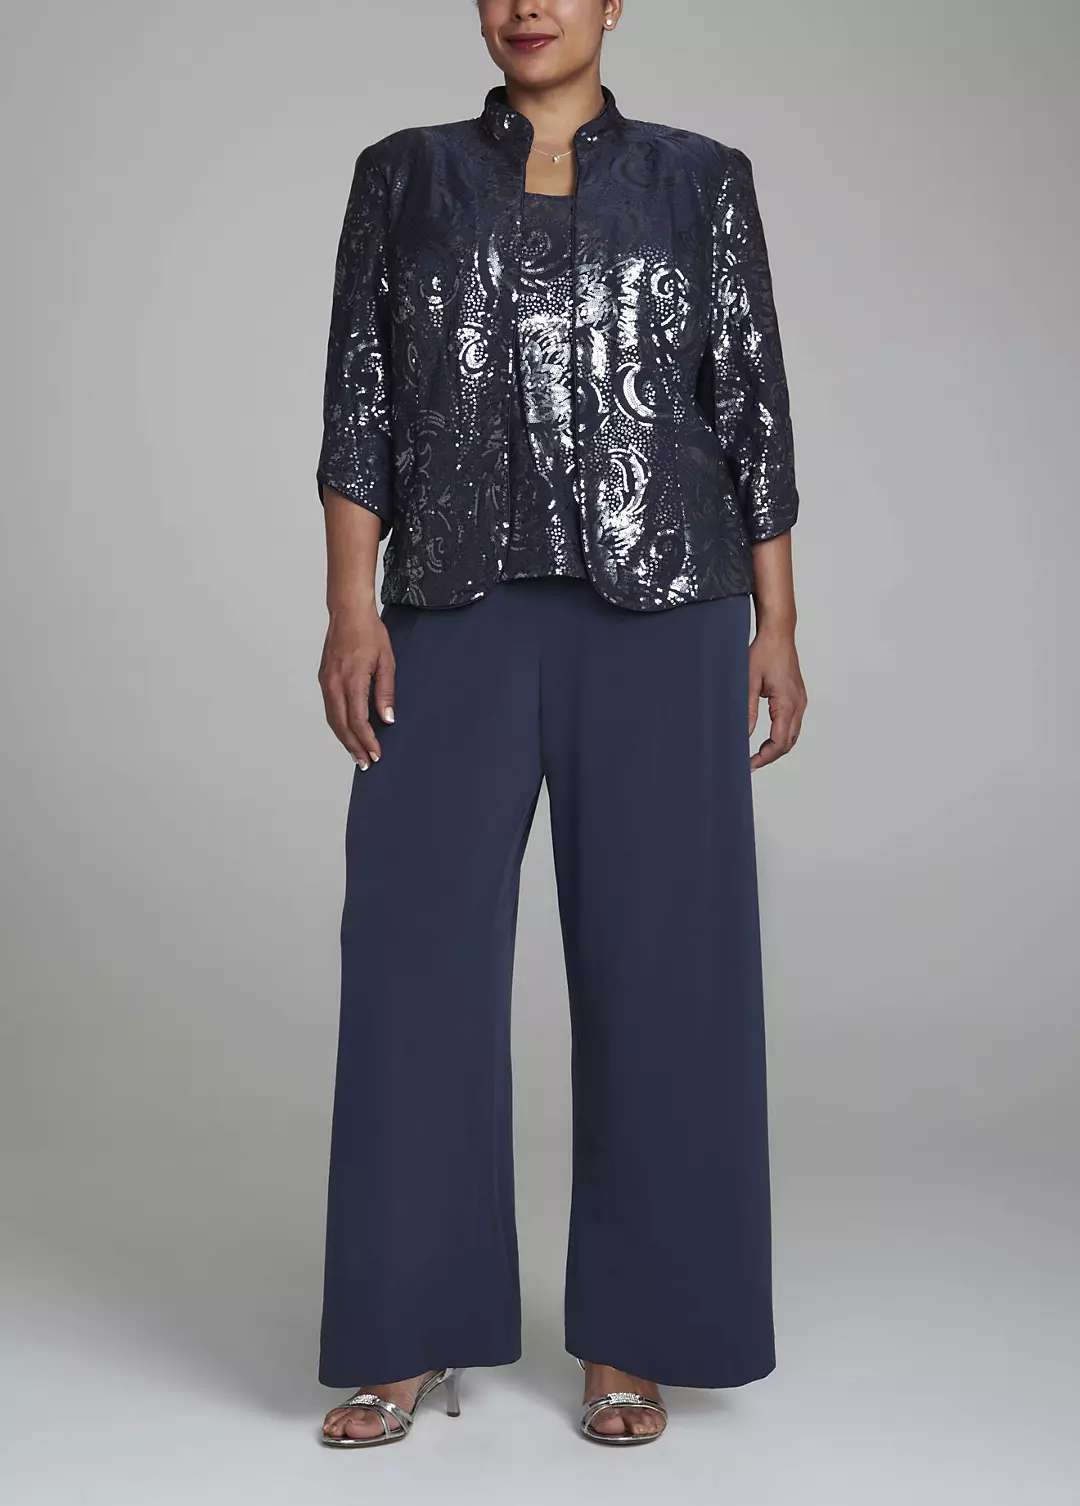 Three Piece Sequin and Jersey Pant Suit Image